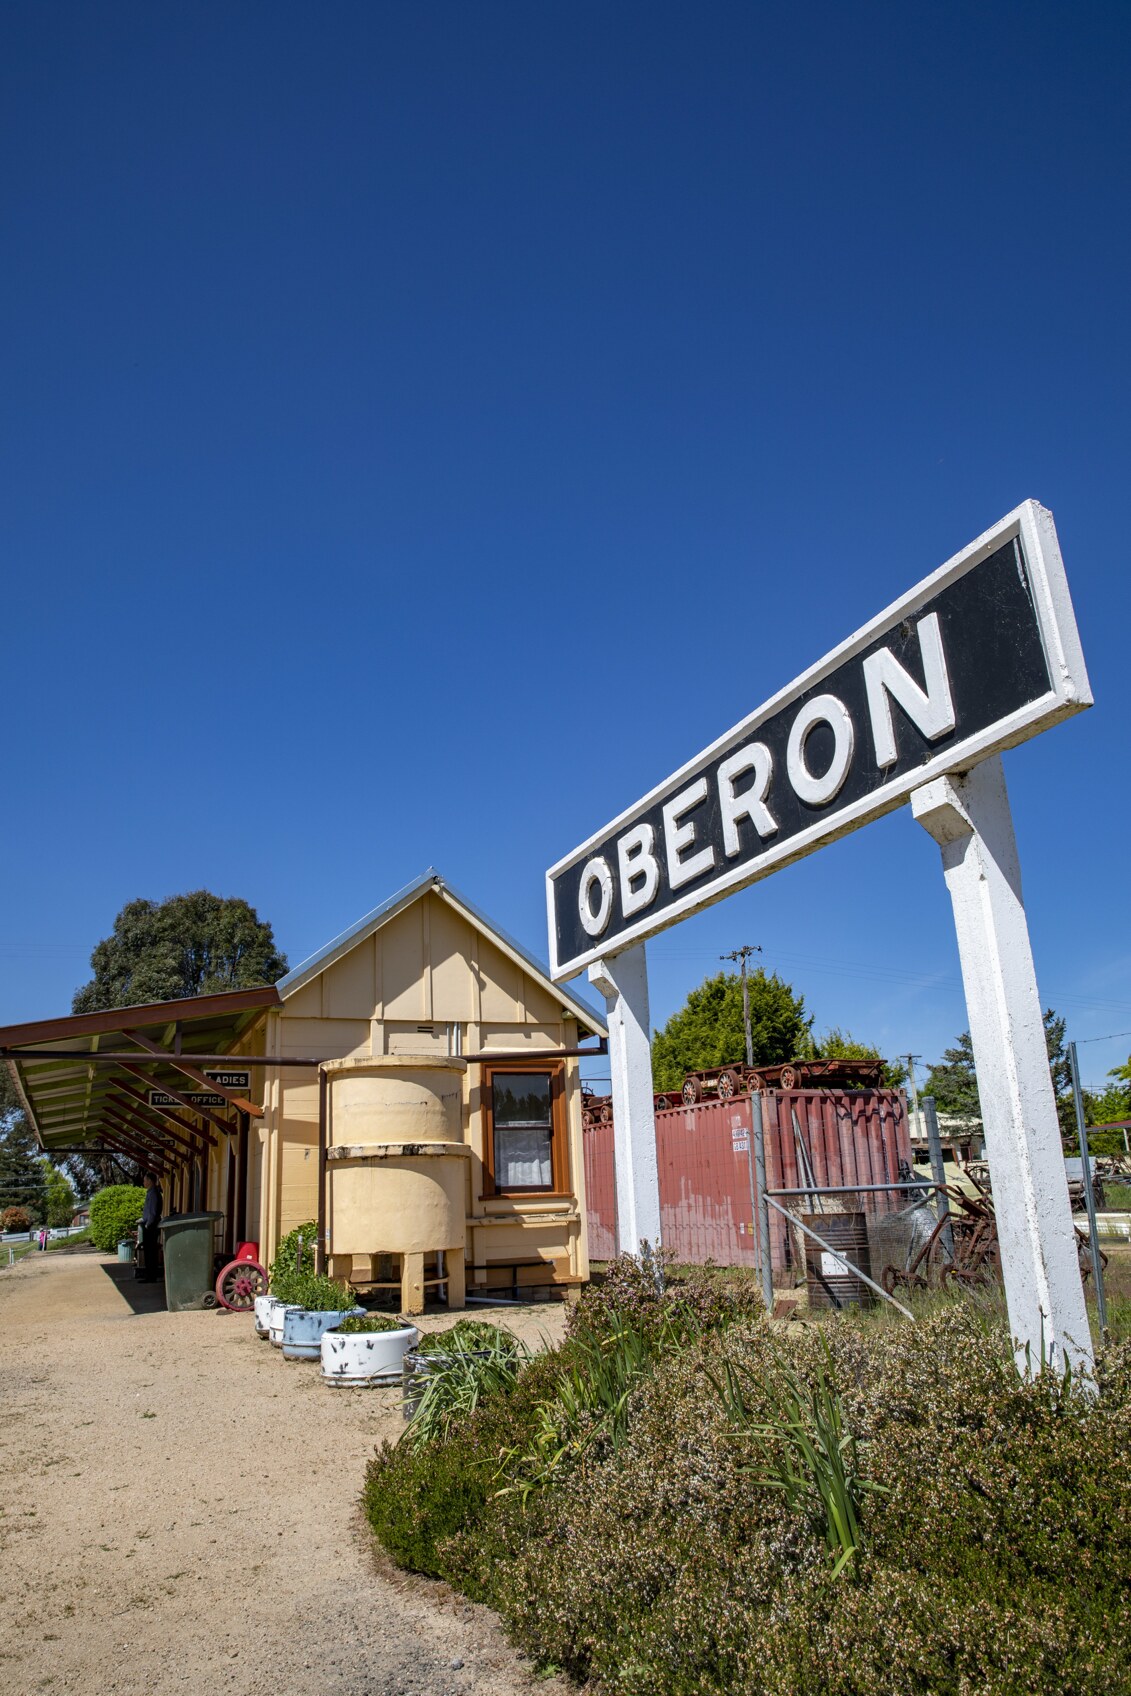 Oberon Town sign photographed against a deep blue summer sky in NSW